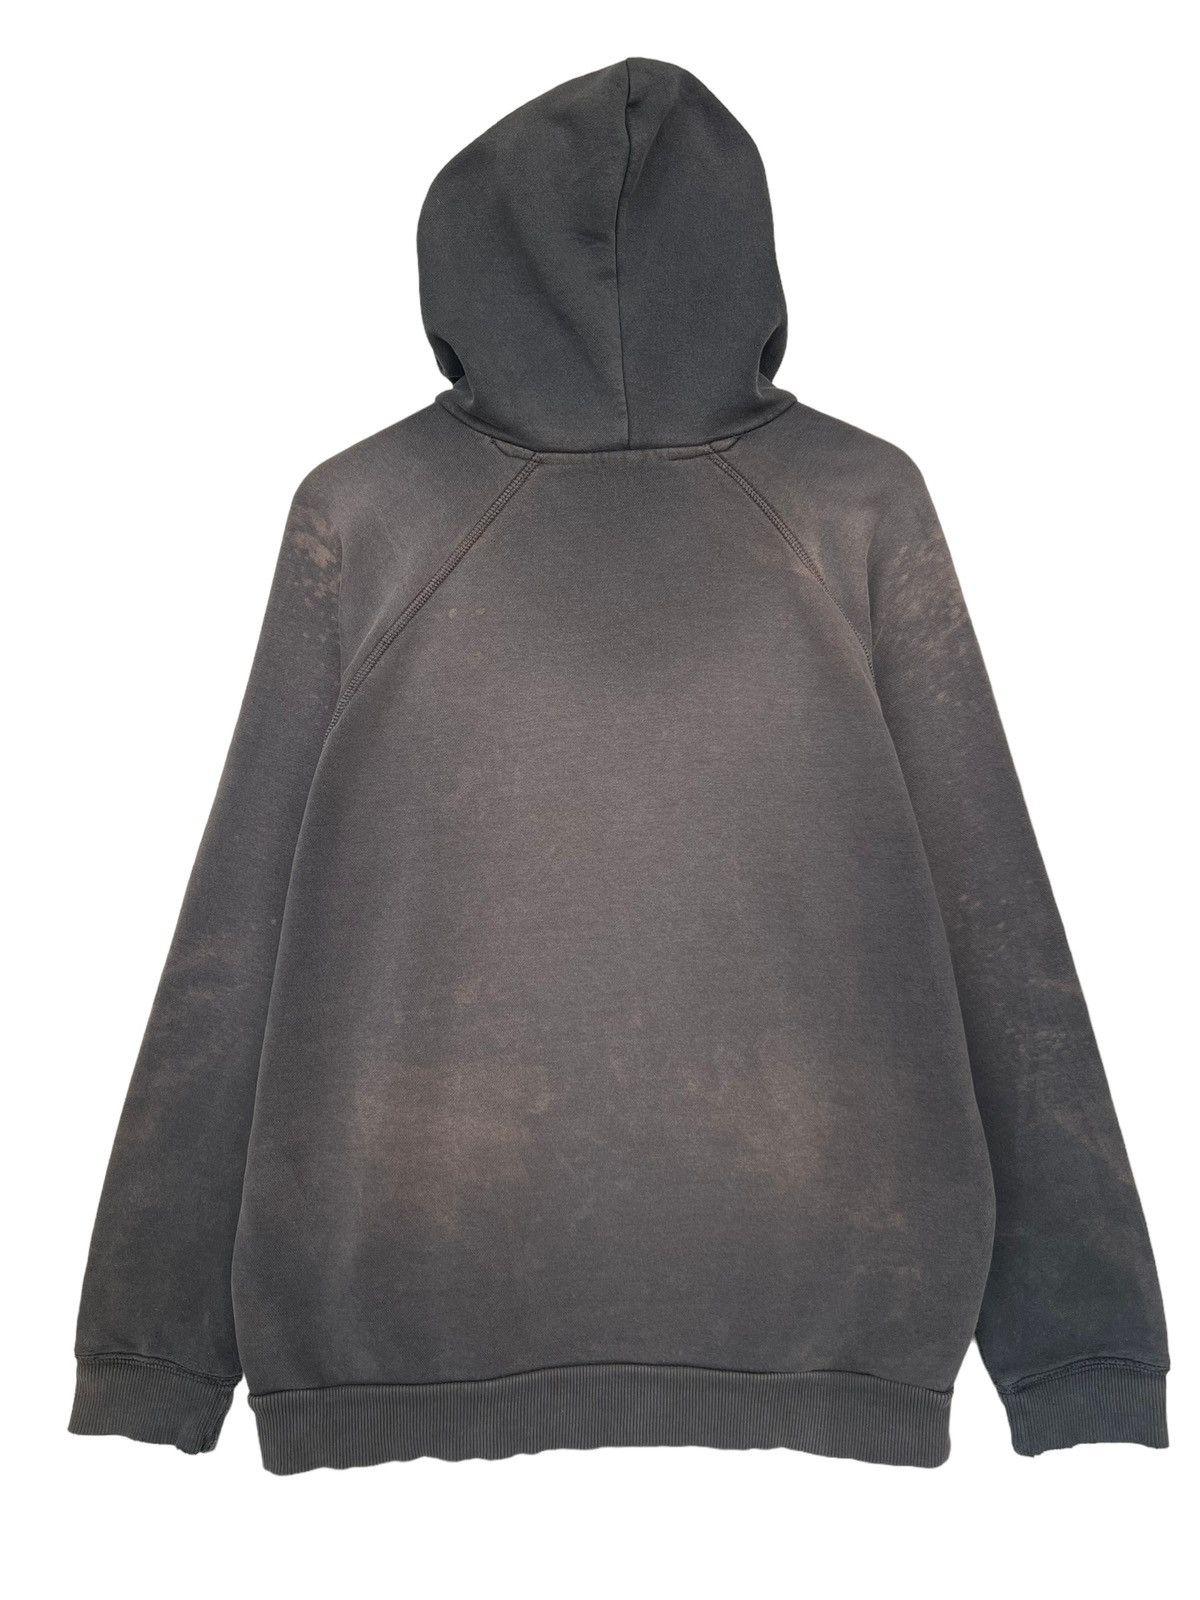 Adidas Distressed Ripped Sunfaded Hoodie - 3